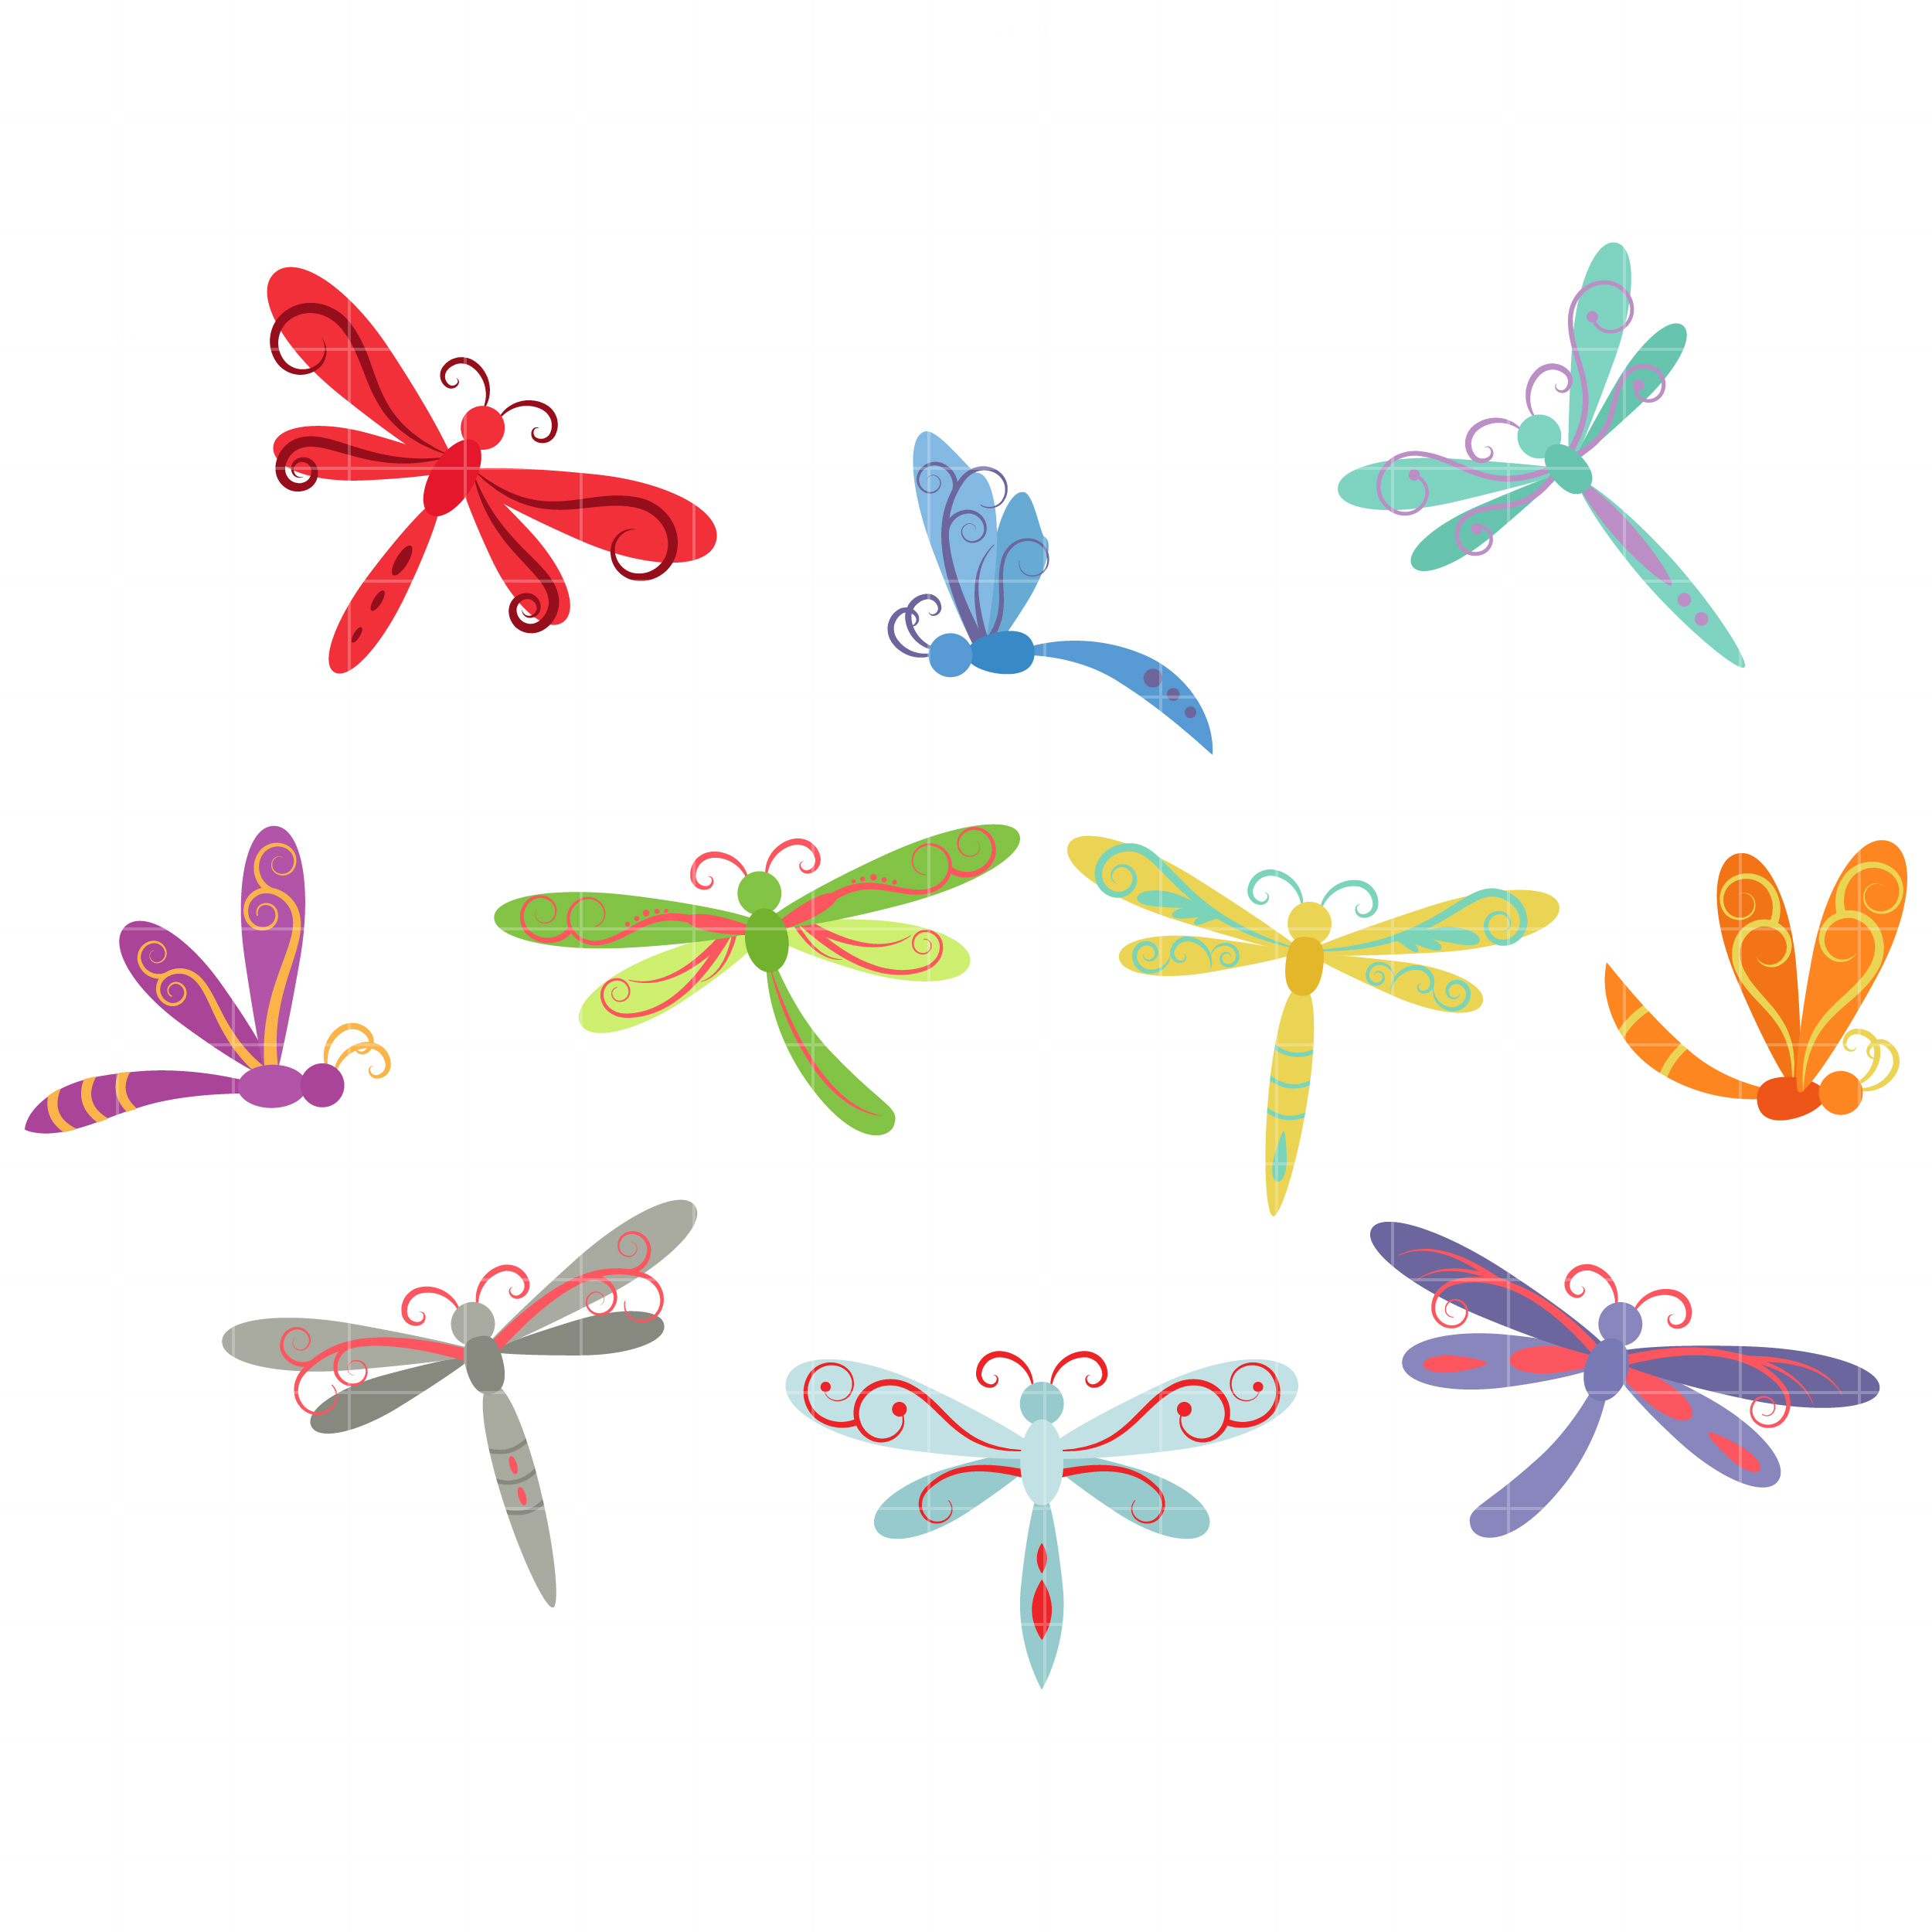 Dragonfly clip art stock image free clipart image 2 clipartcow 